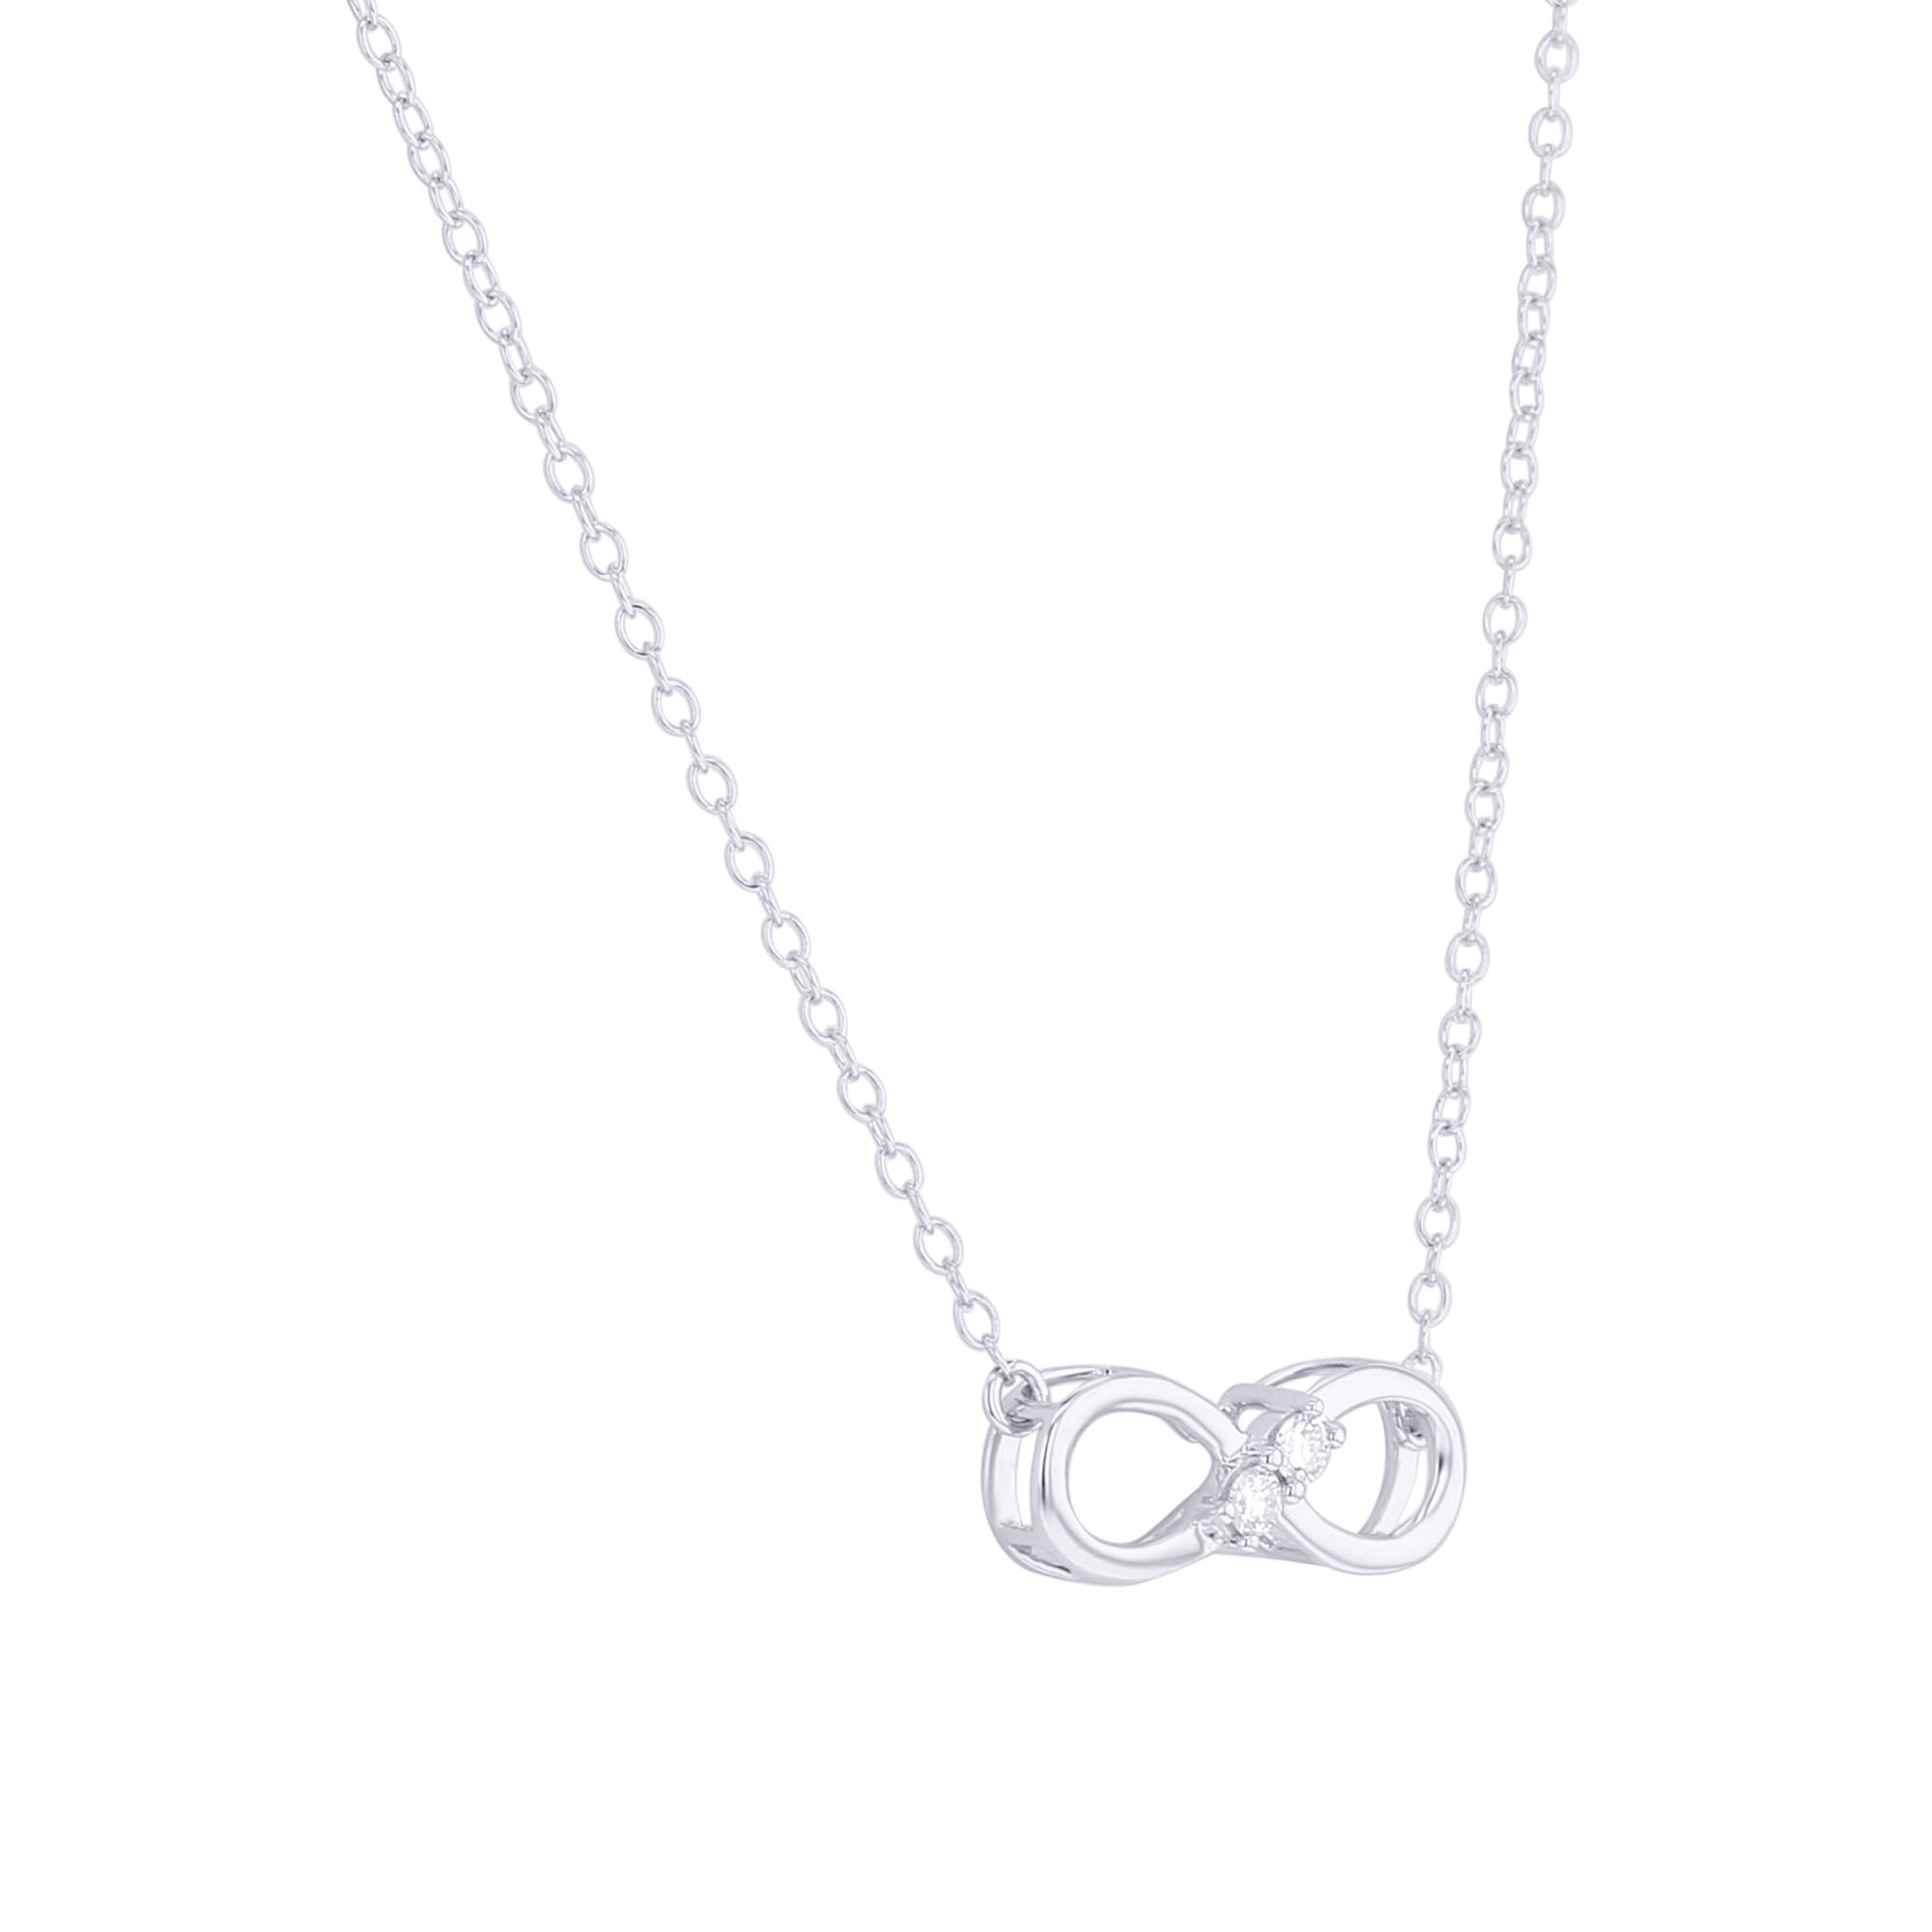 Brilliant Cut .33twt Diamond Necklace – Forever Today by Jilco